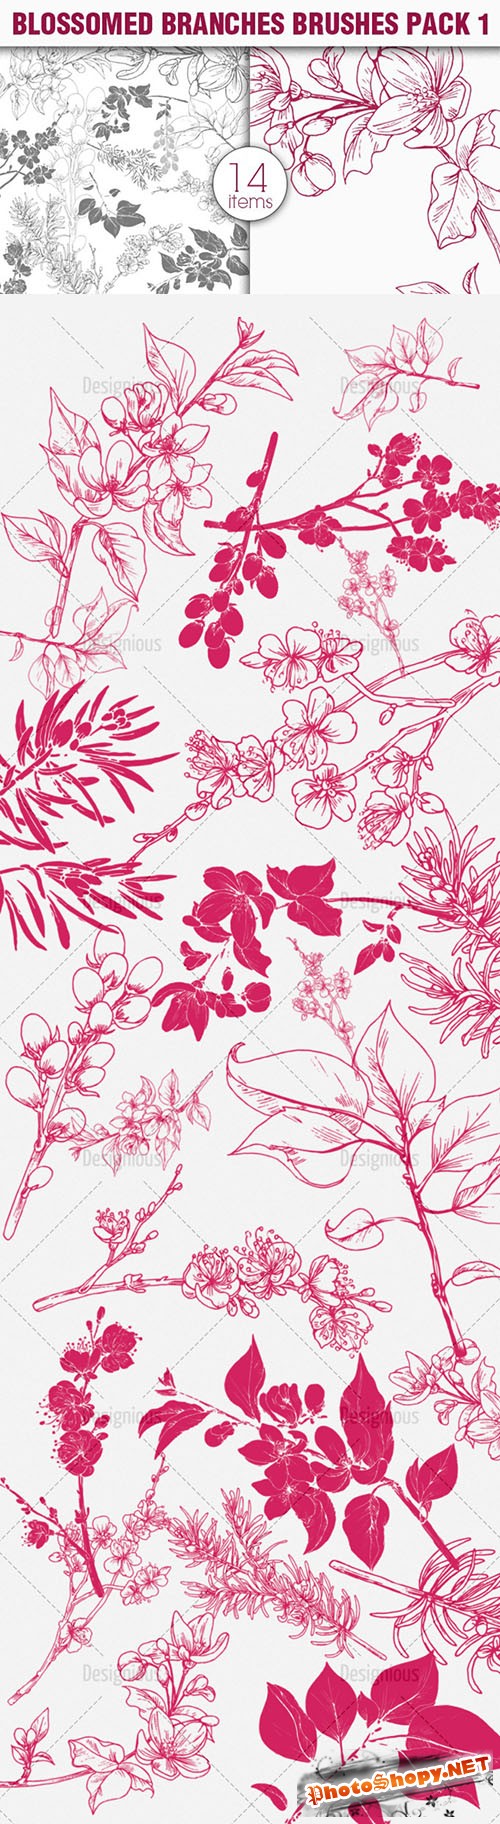 Blossomed Branches Photoshop Brushes Pack 1